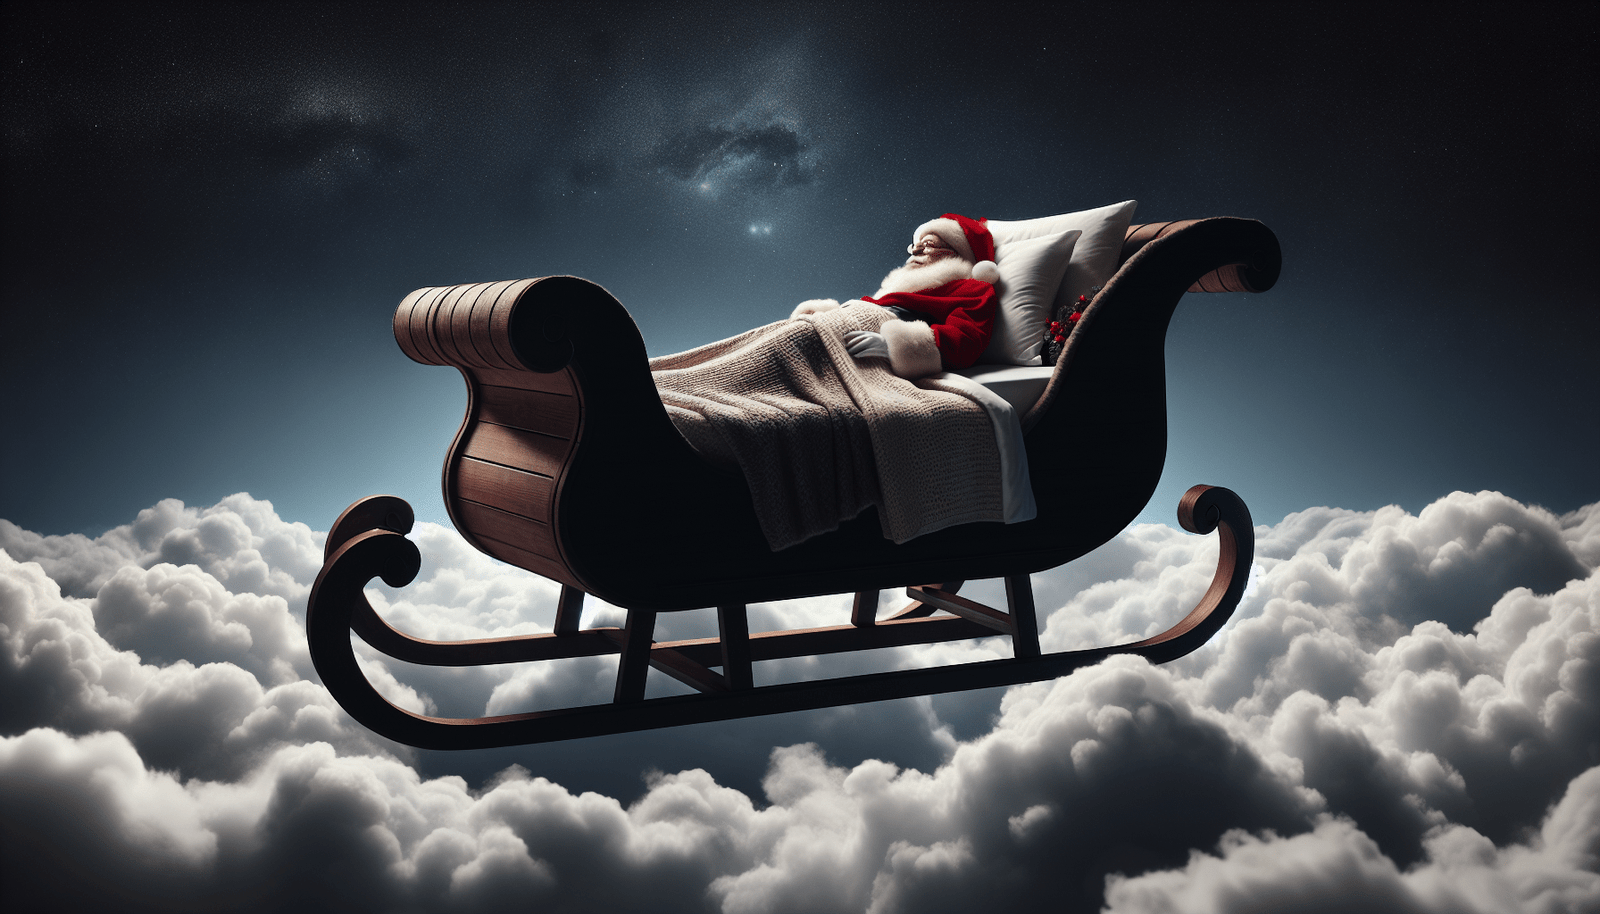 Santa Claus is sleeping in his sleigh on a bed of clouds